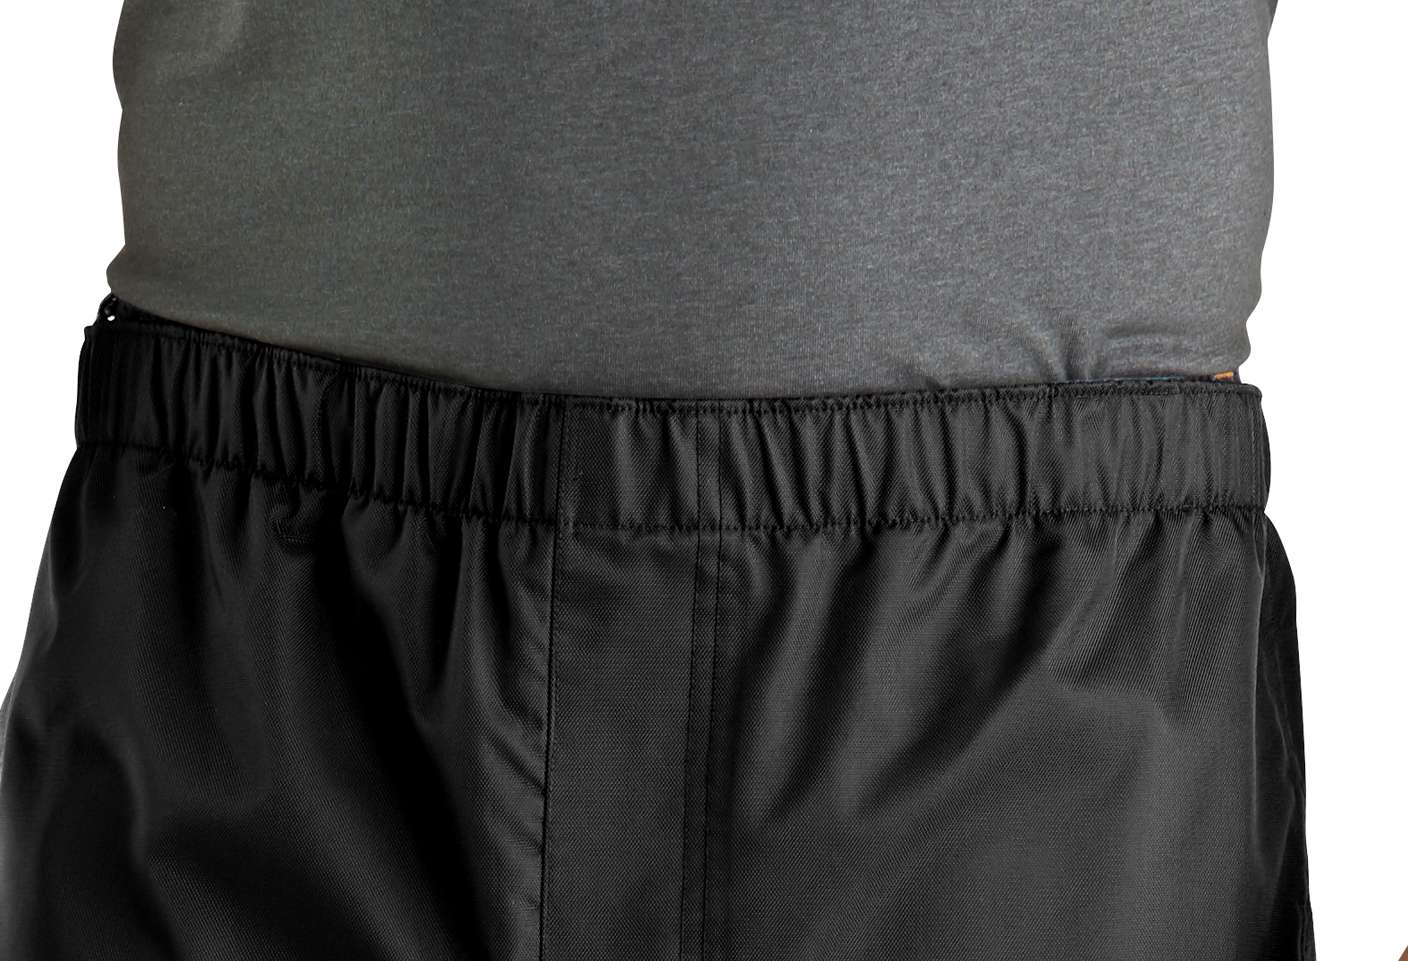 Elastic waistband with adjustable drawcord and cord-lock